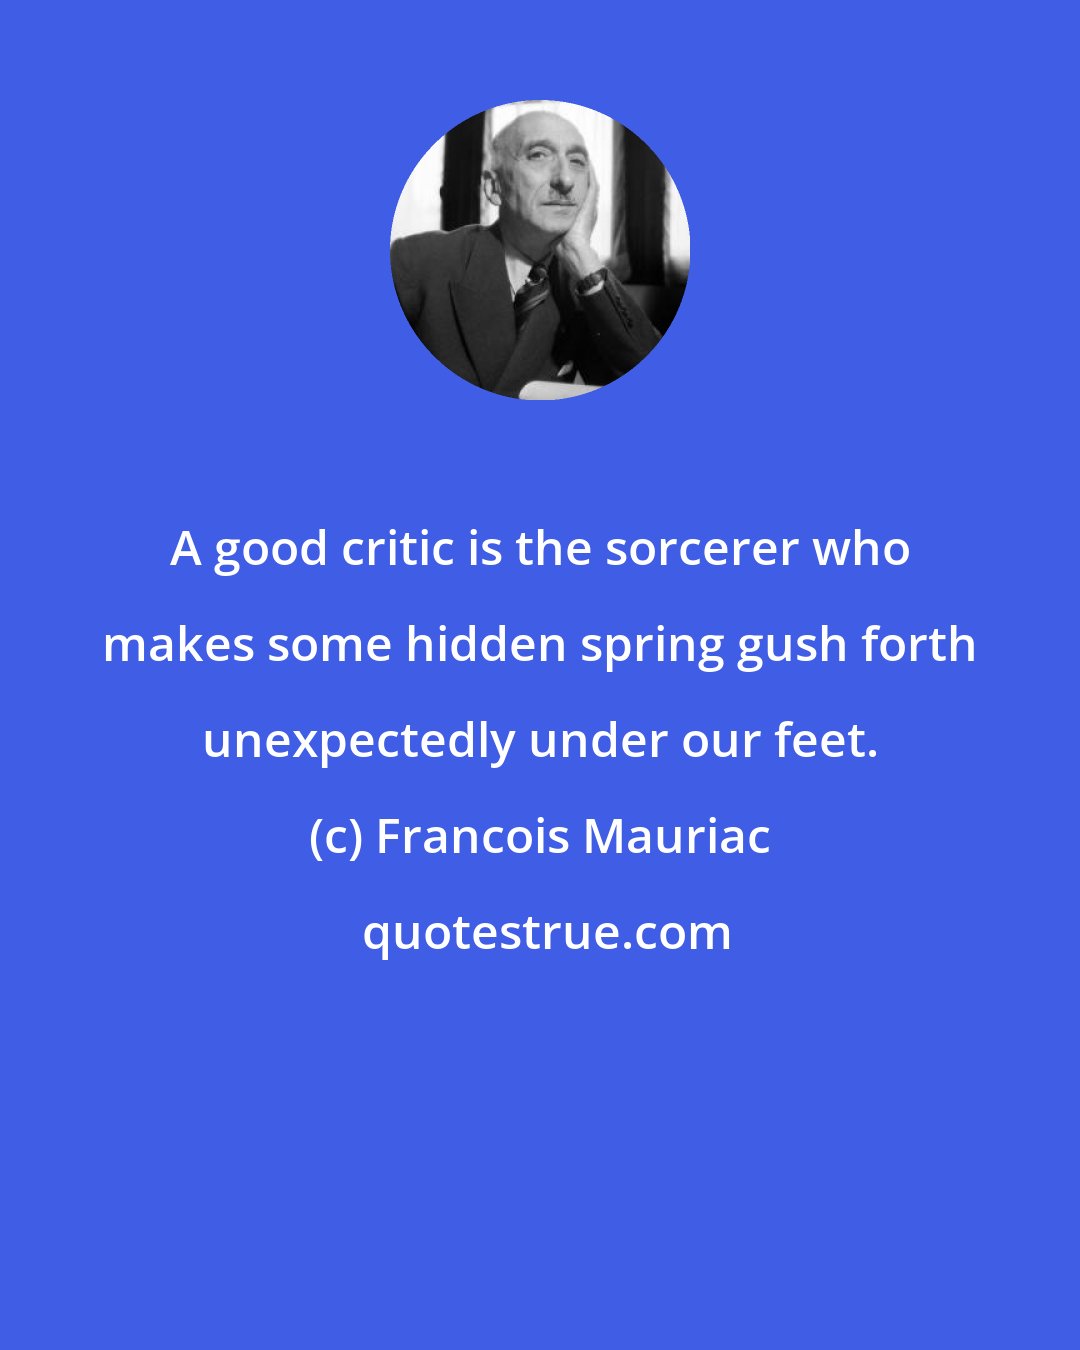 Francois Mauriac: A good critic is the sorcerer who makes some hidden spring gush forth unexpectedly under our feet.